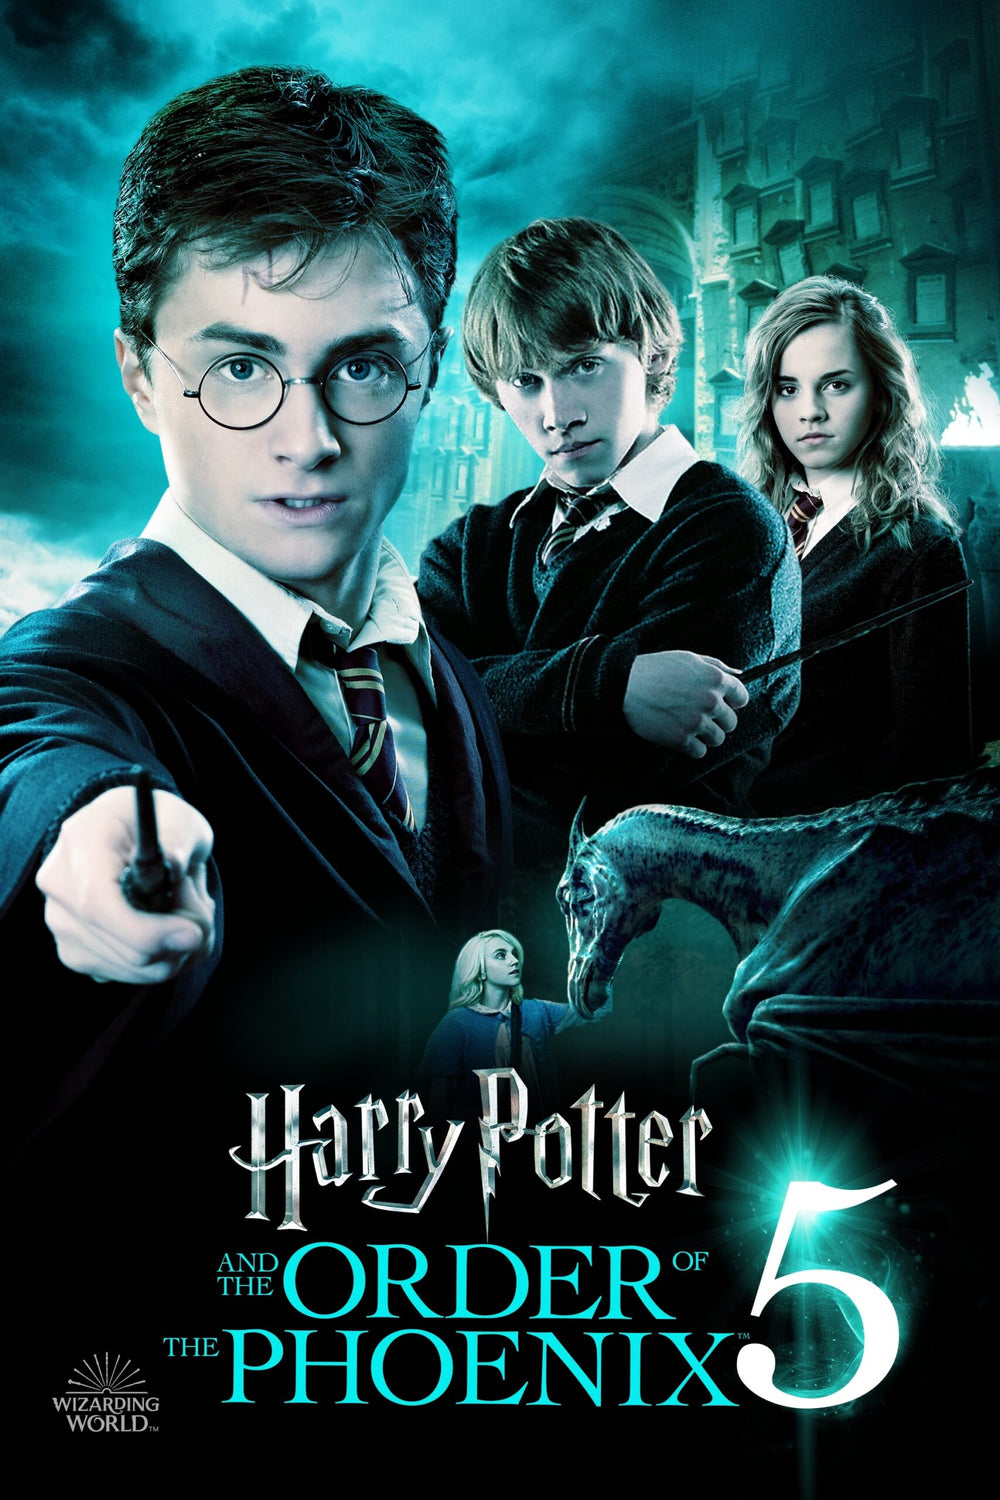 HARRY POTTER AND THE ORDER OF THE PHOENIX 4K Vudu/iTunes Via Moviesanywhere